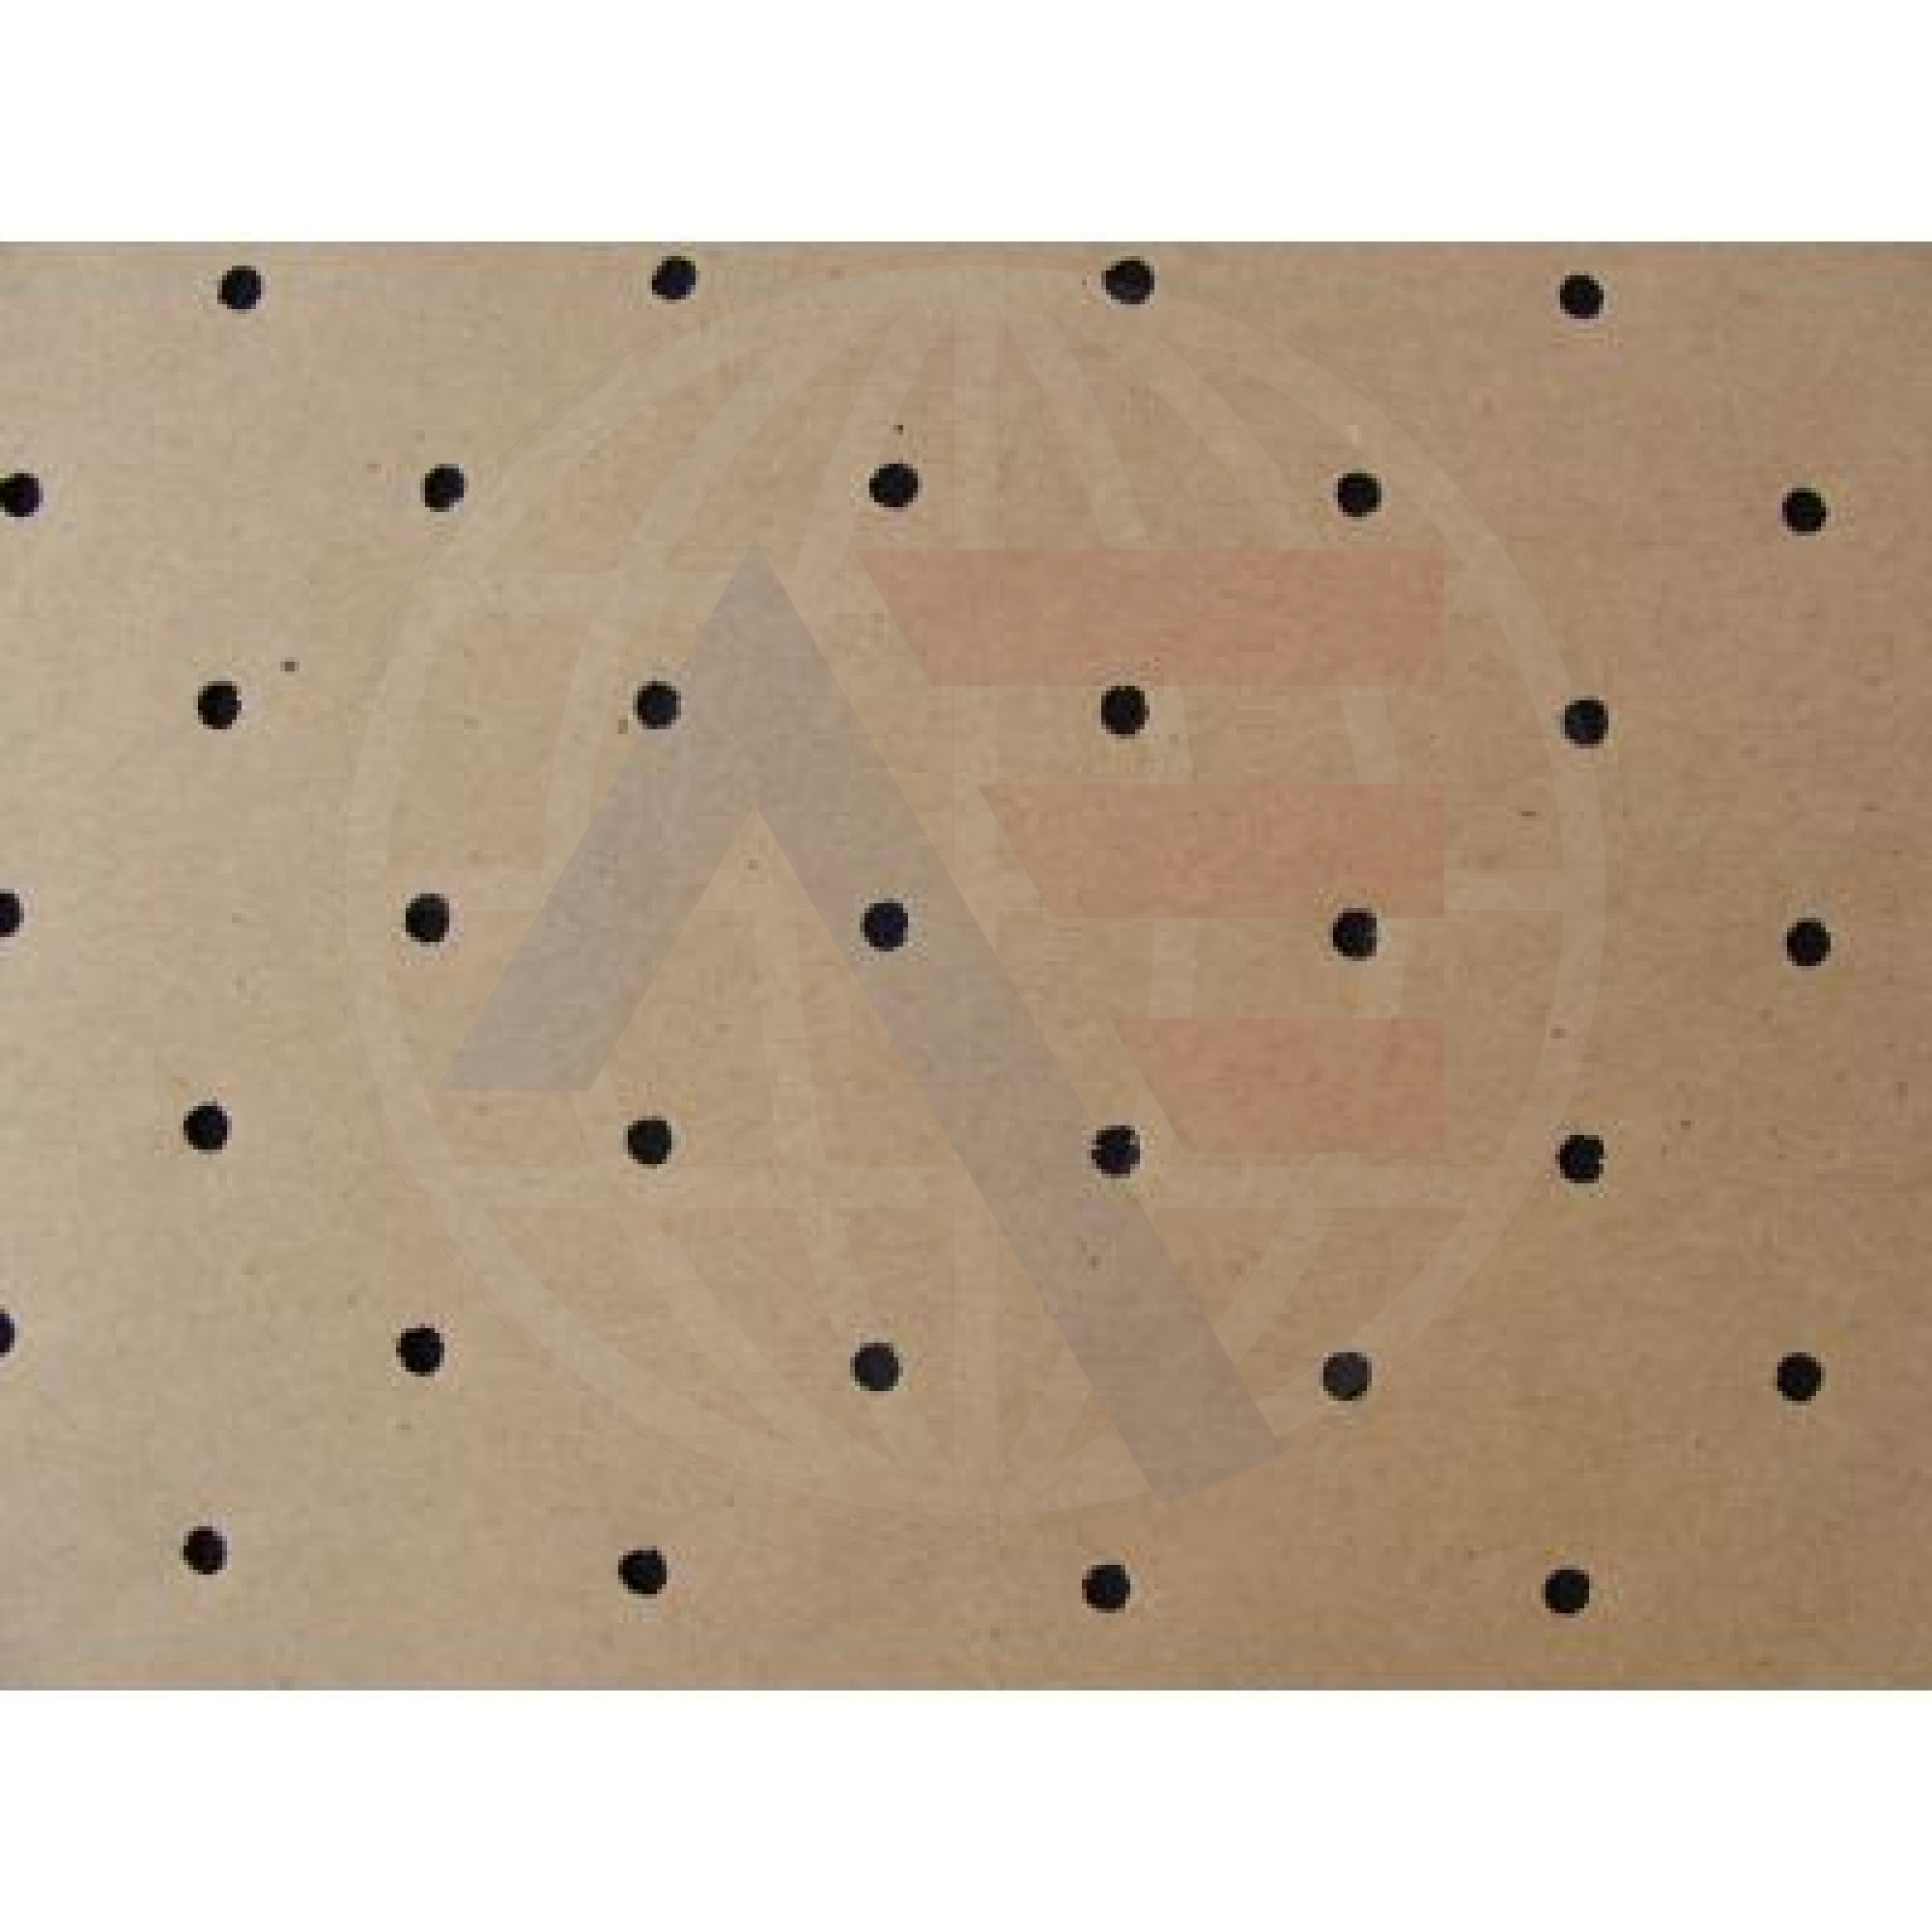 Pp128Xsm75 Perforated Underlay Paper (1X Roll)